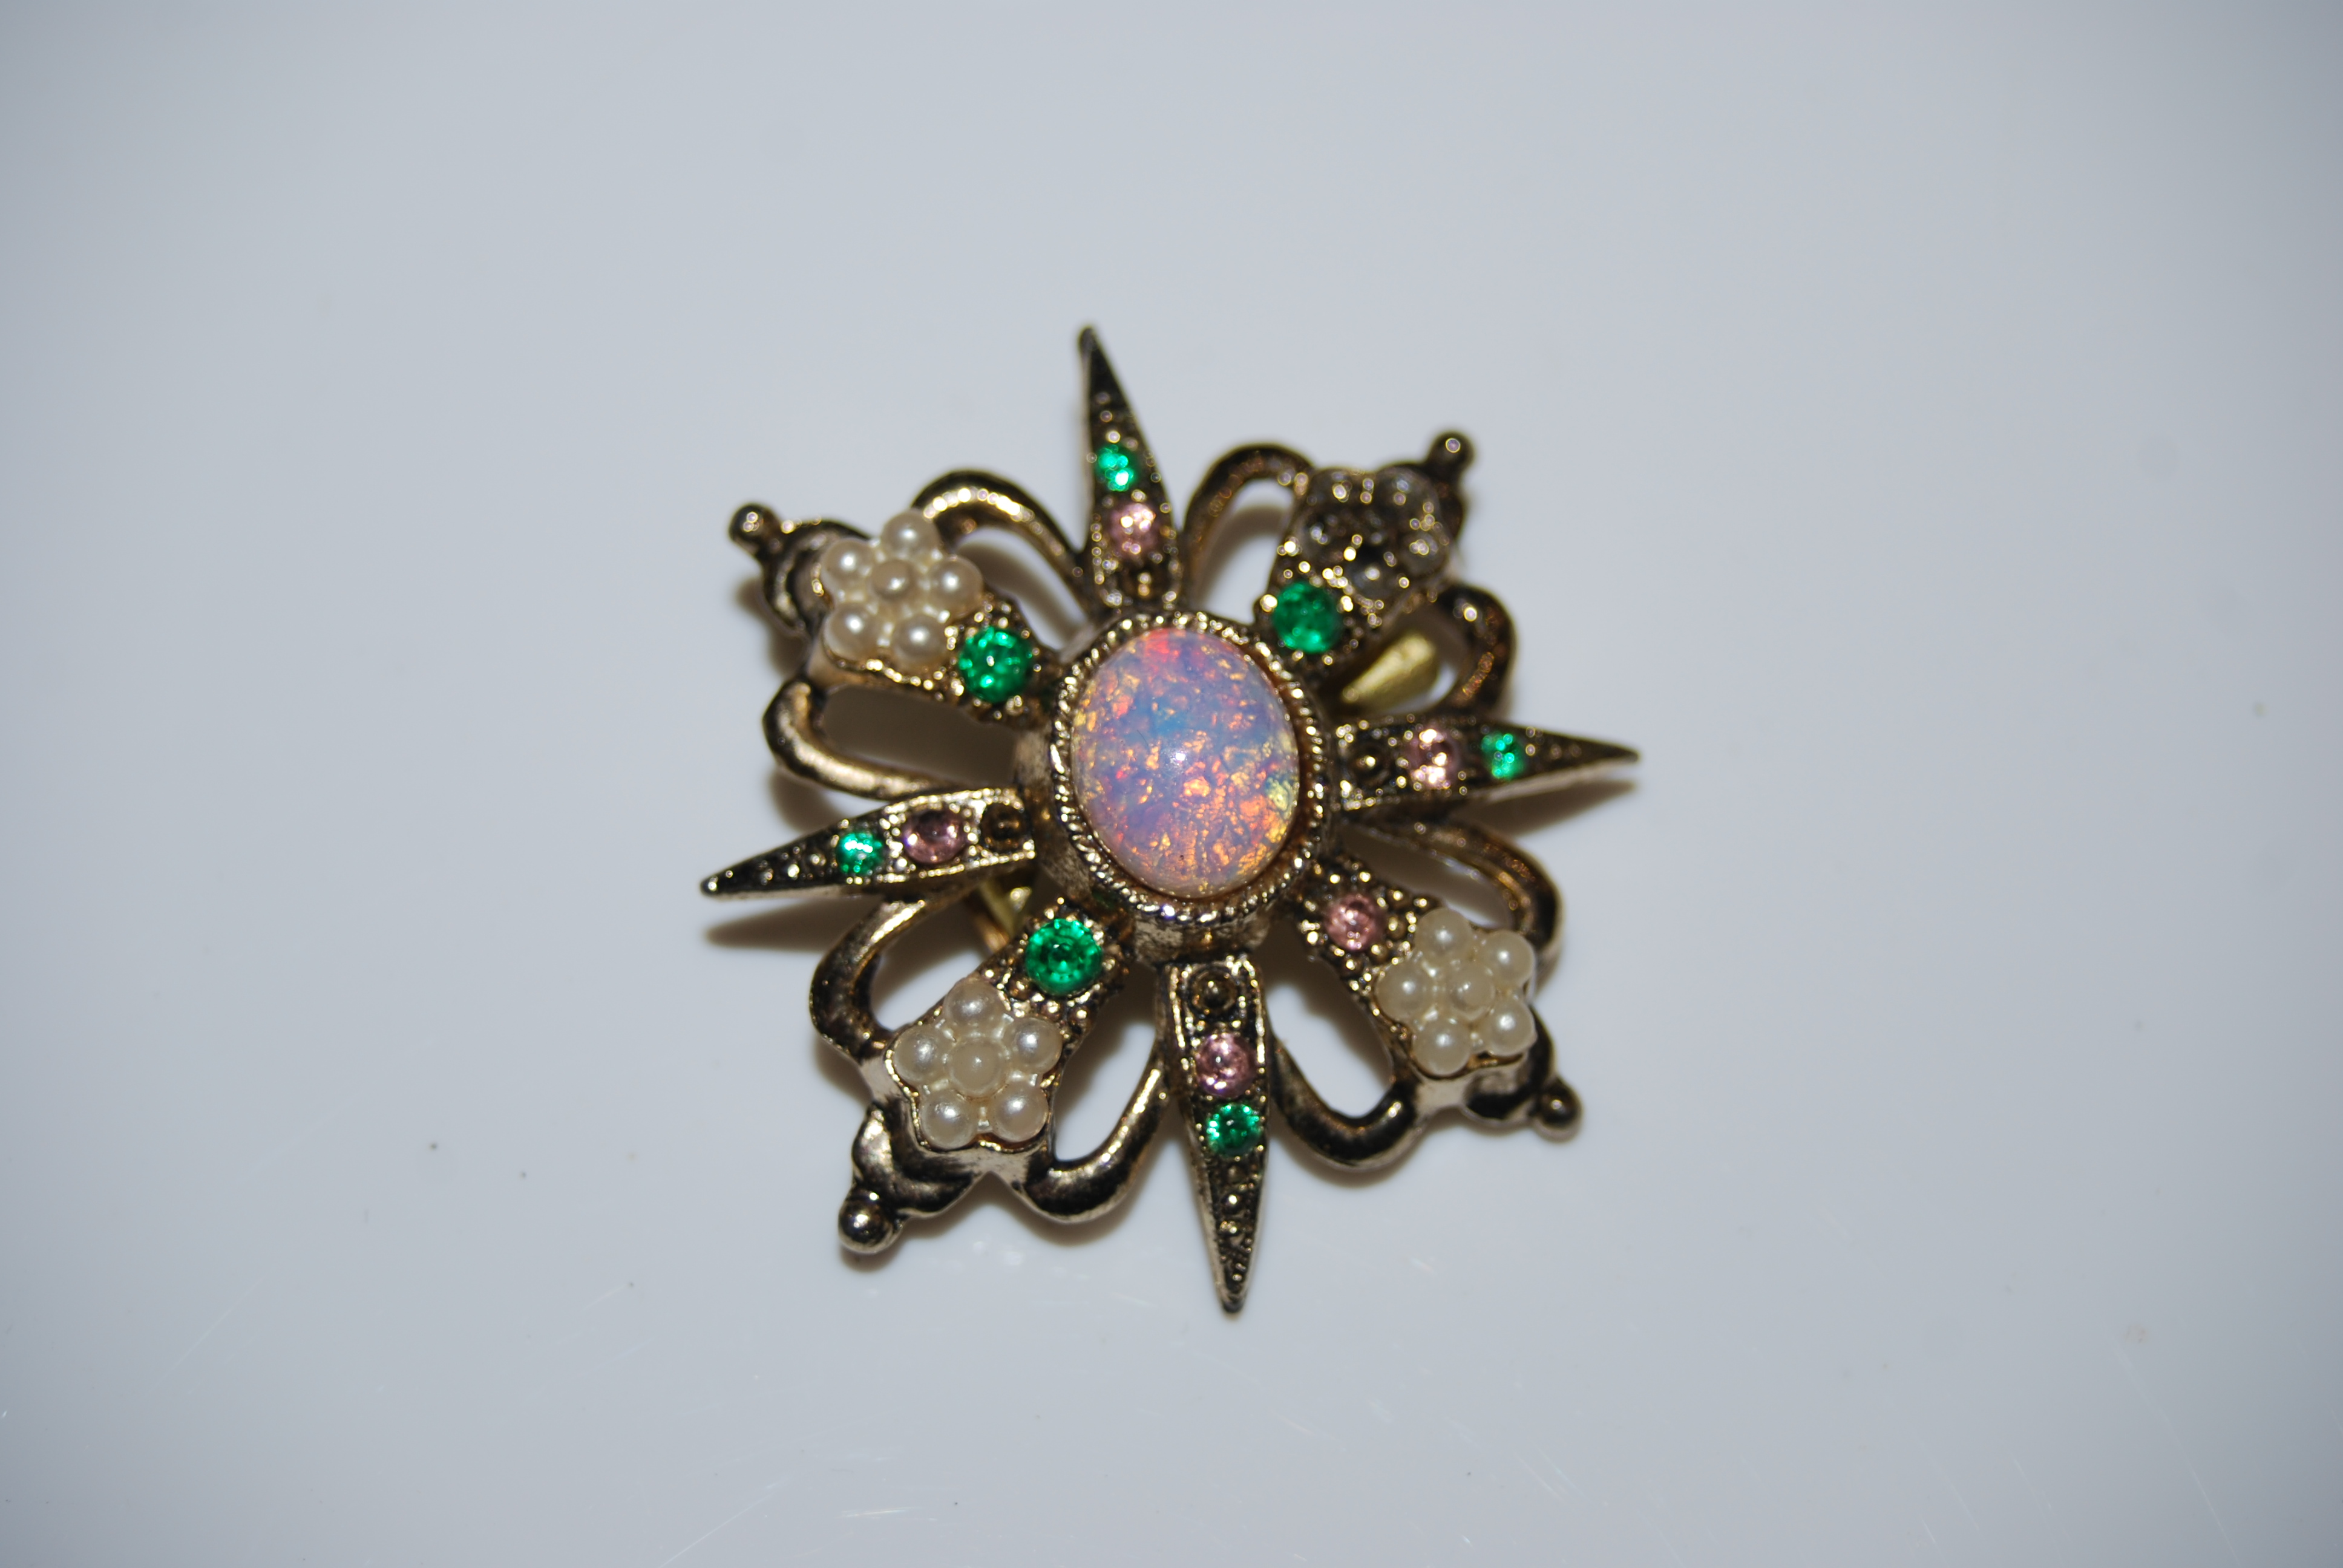 A COSTUME JEWELLERY BROOCH CENTRED WITH OVAL CABOUCHON OPAL